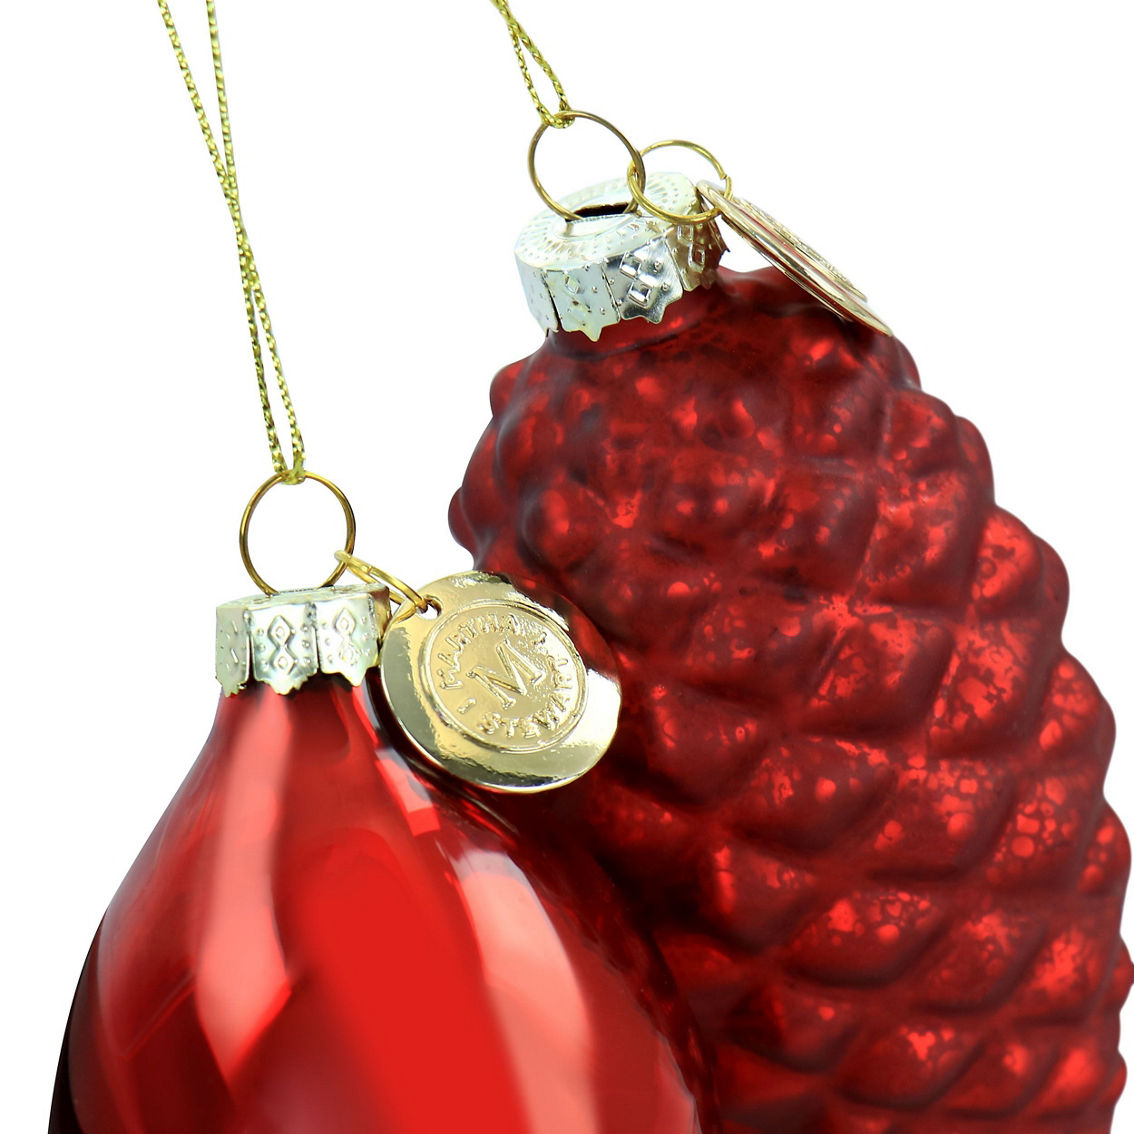 Martha Stewart Holiday Pointy Ball and Pinecone 4 Piece Ornament Set in Red - Image 4 of 5